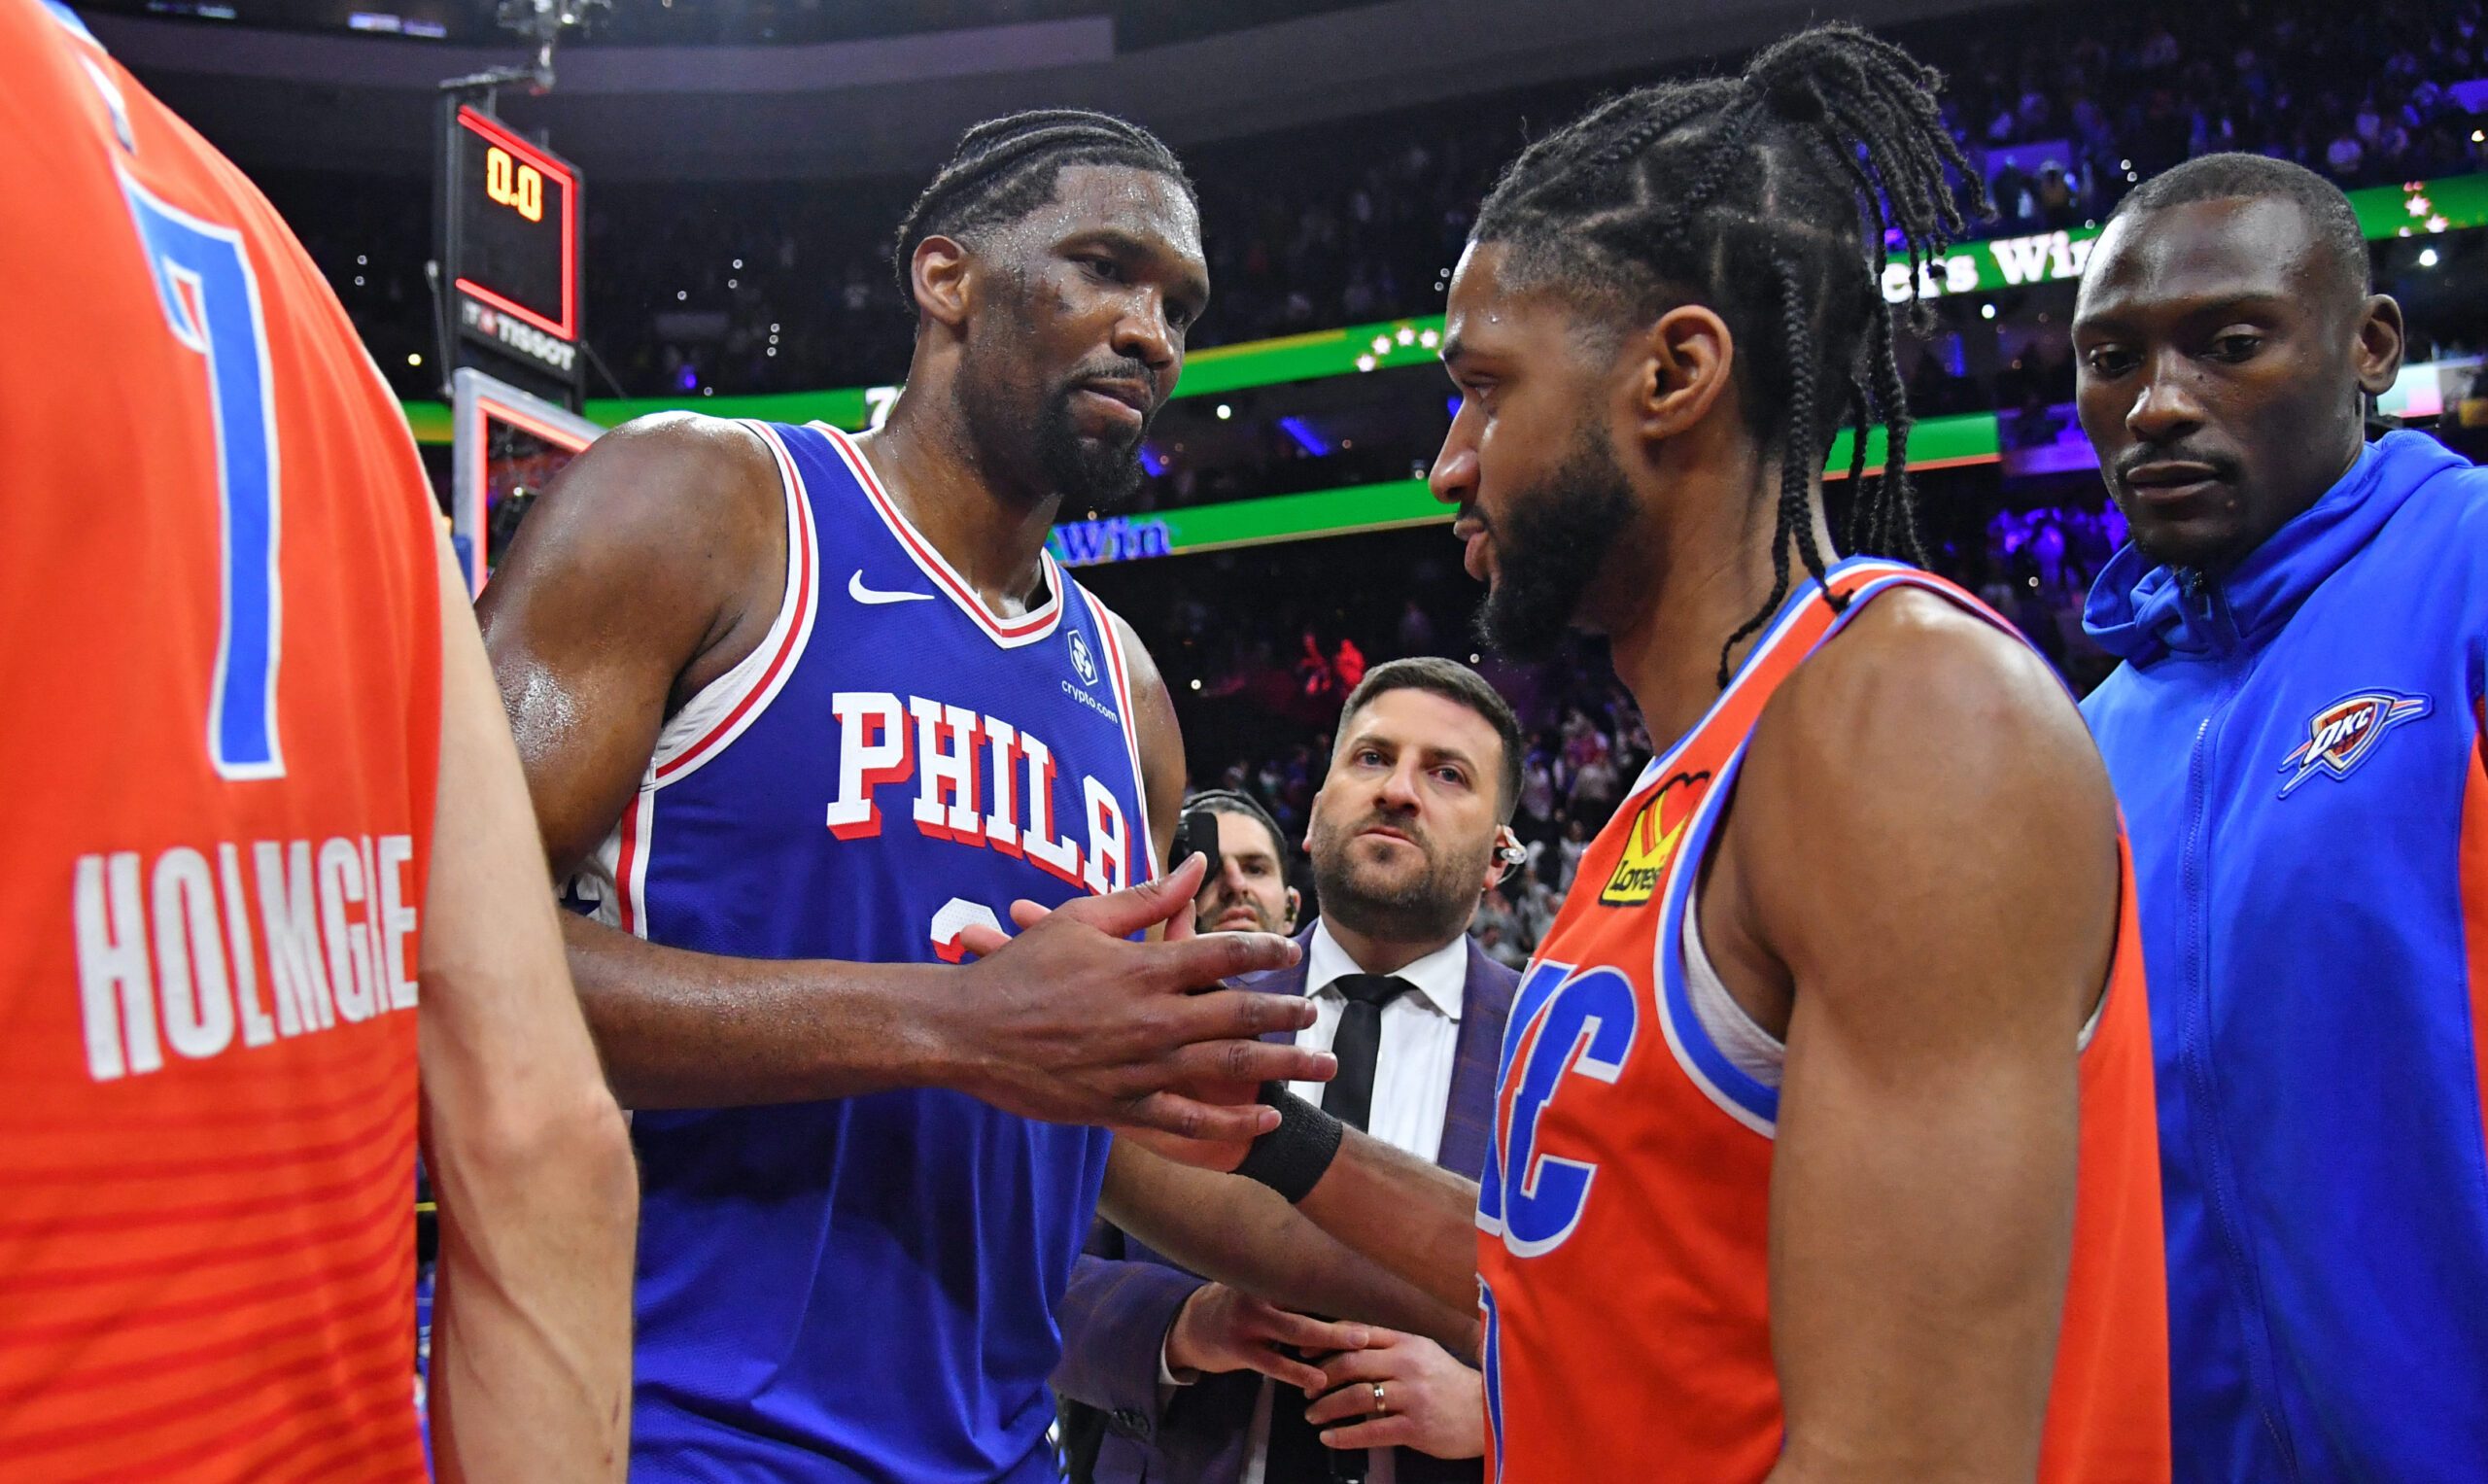 Back in form: MVP Embiid returns as Sixers hold off Thunder 